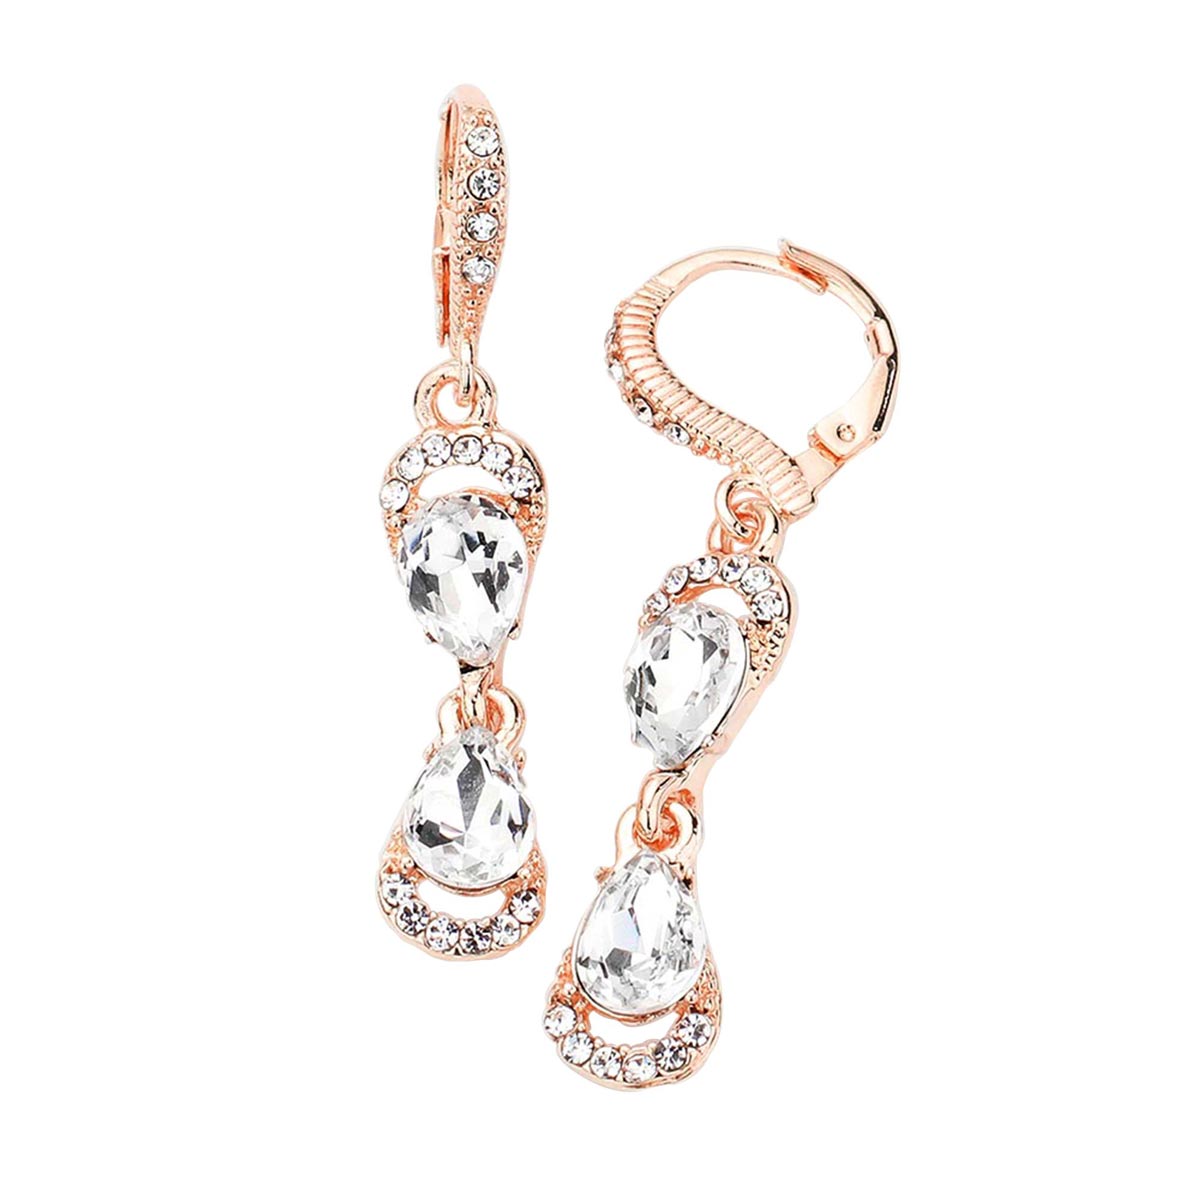 Rose Gold ensemble with a classy style. The perfect accessory for adding just the right amount of shimmer and a touch of class to special events. Jewelry that fits your lifestyle and makes your moments awesome! They will dangle on your earlobes & bring a smile of joy to those who look at you.